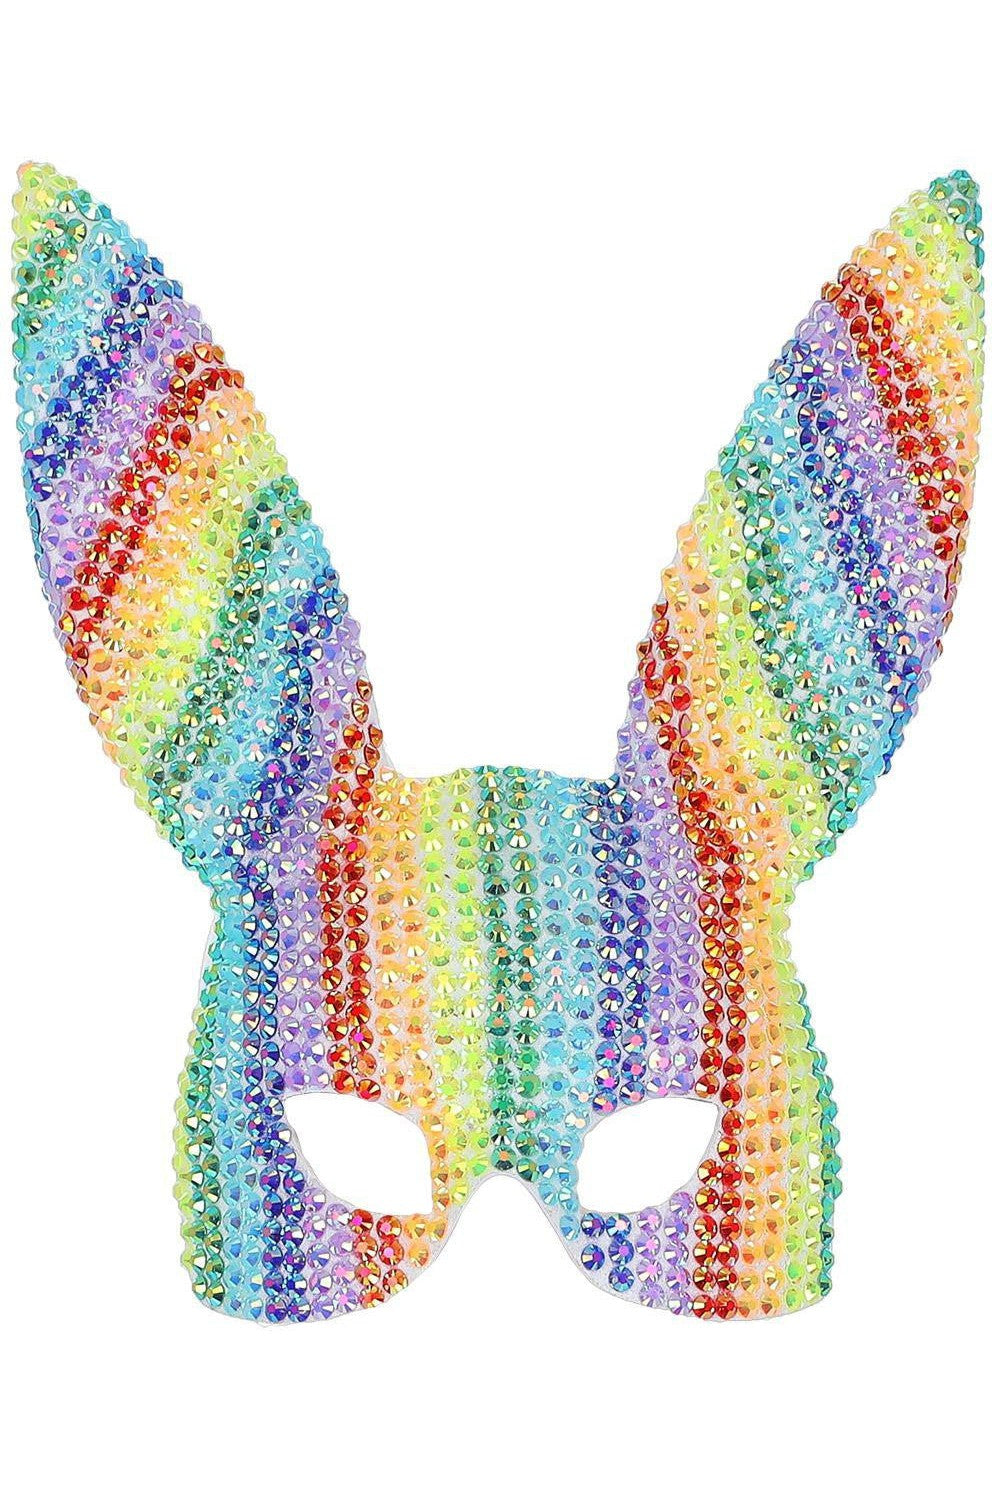 Fever Deluxe Jewel Studded Bunny Mask